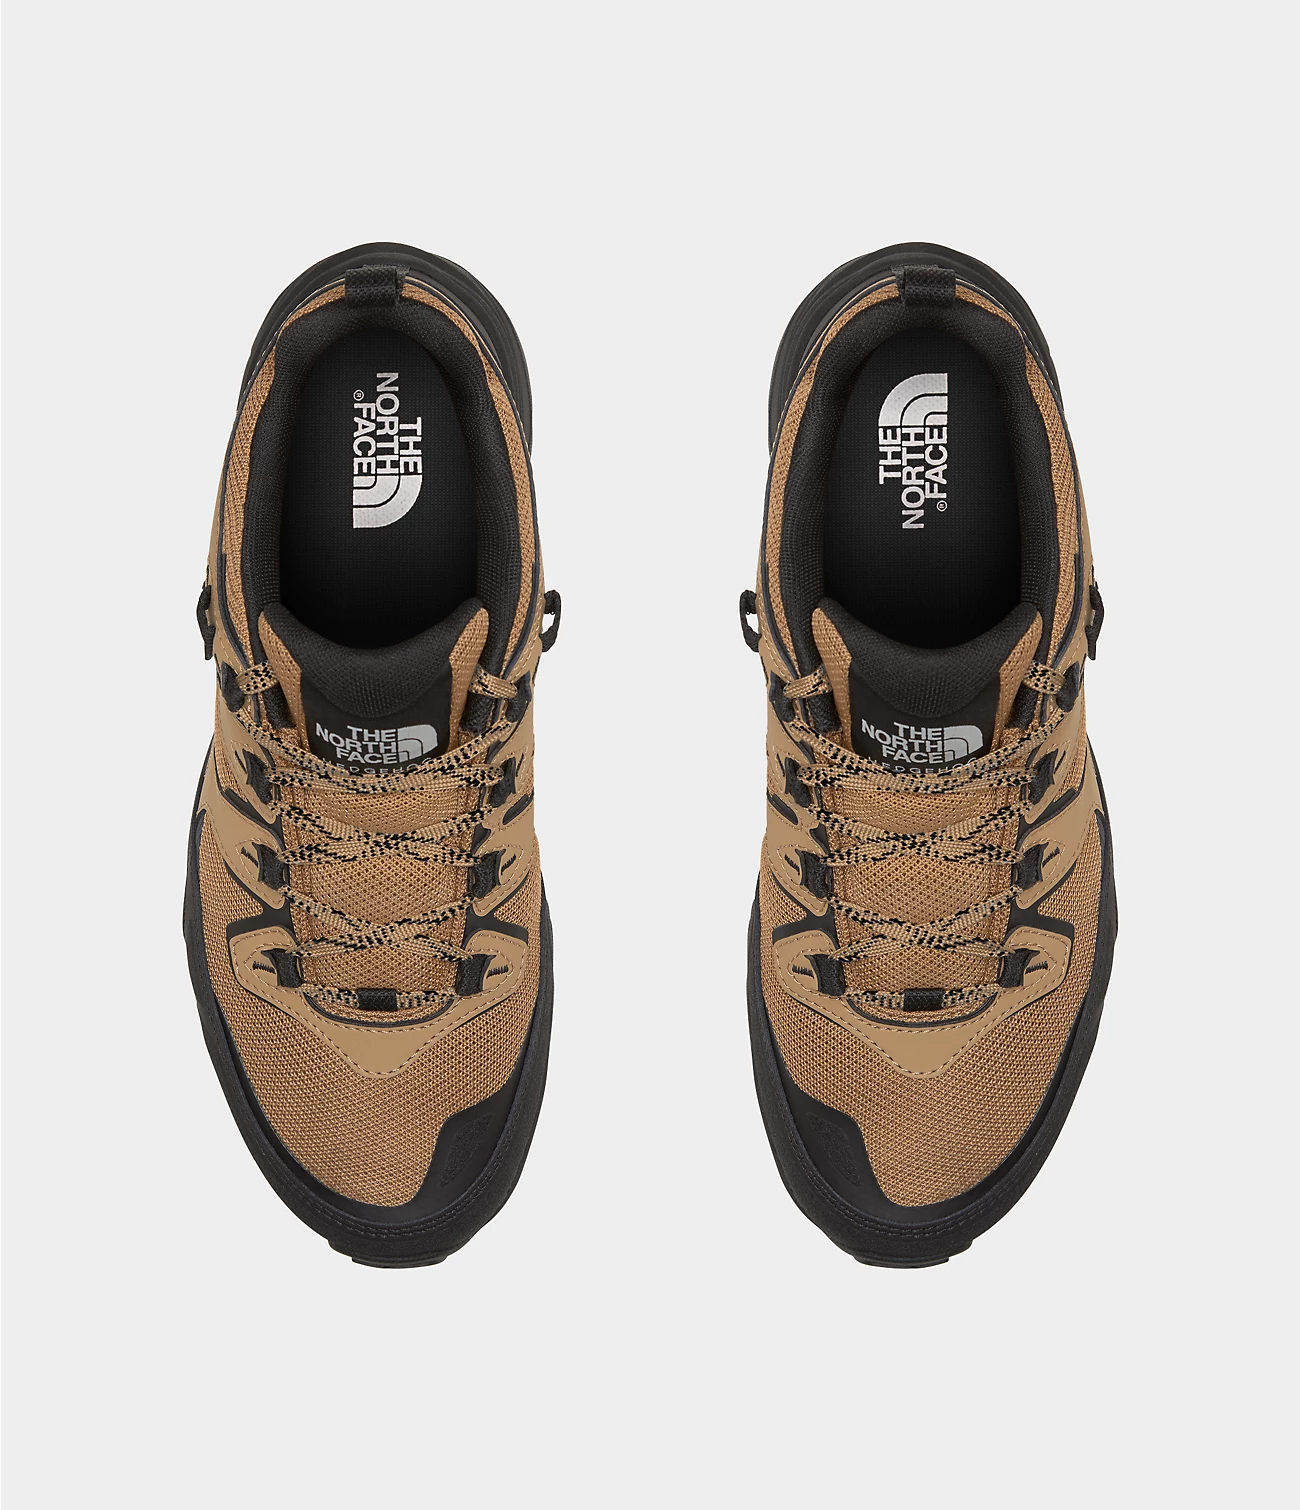 The North Face The North Face M's Hedgehog 3 Waterproof Shoe